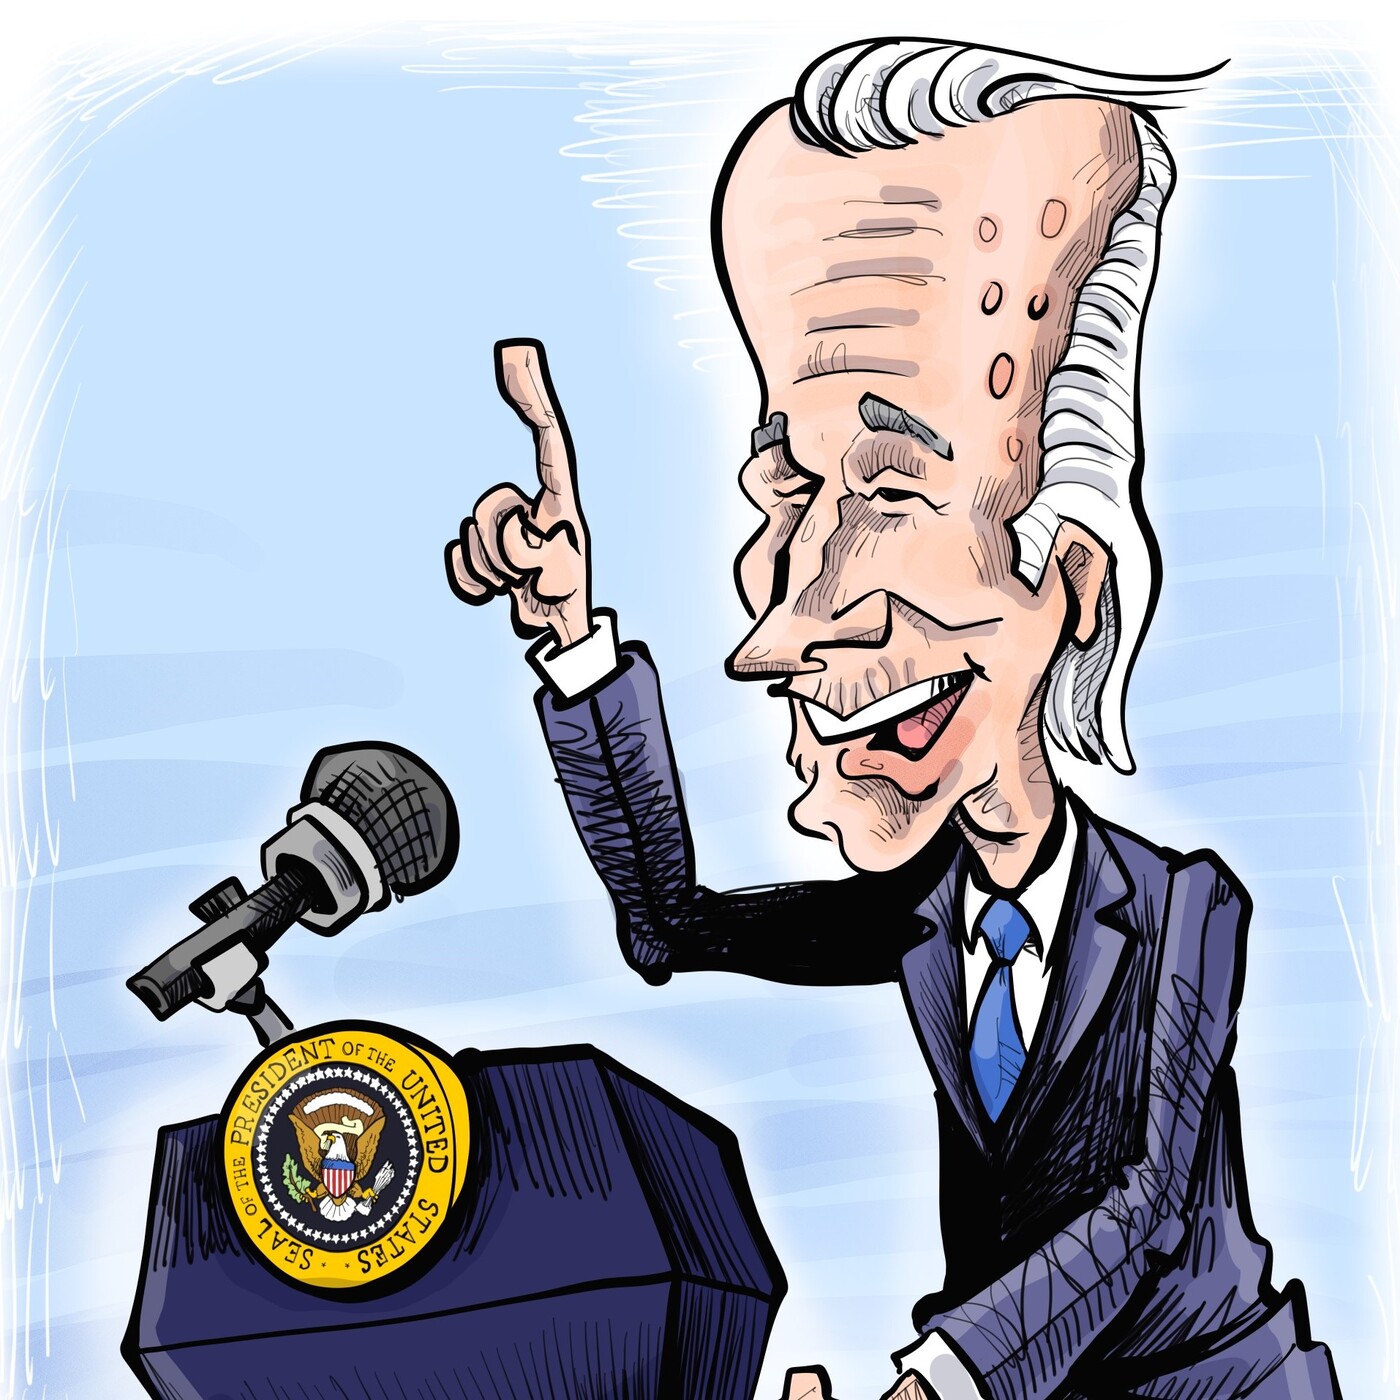 Biden is old, and that's not ageism